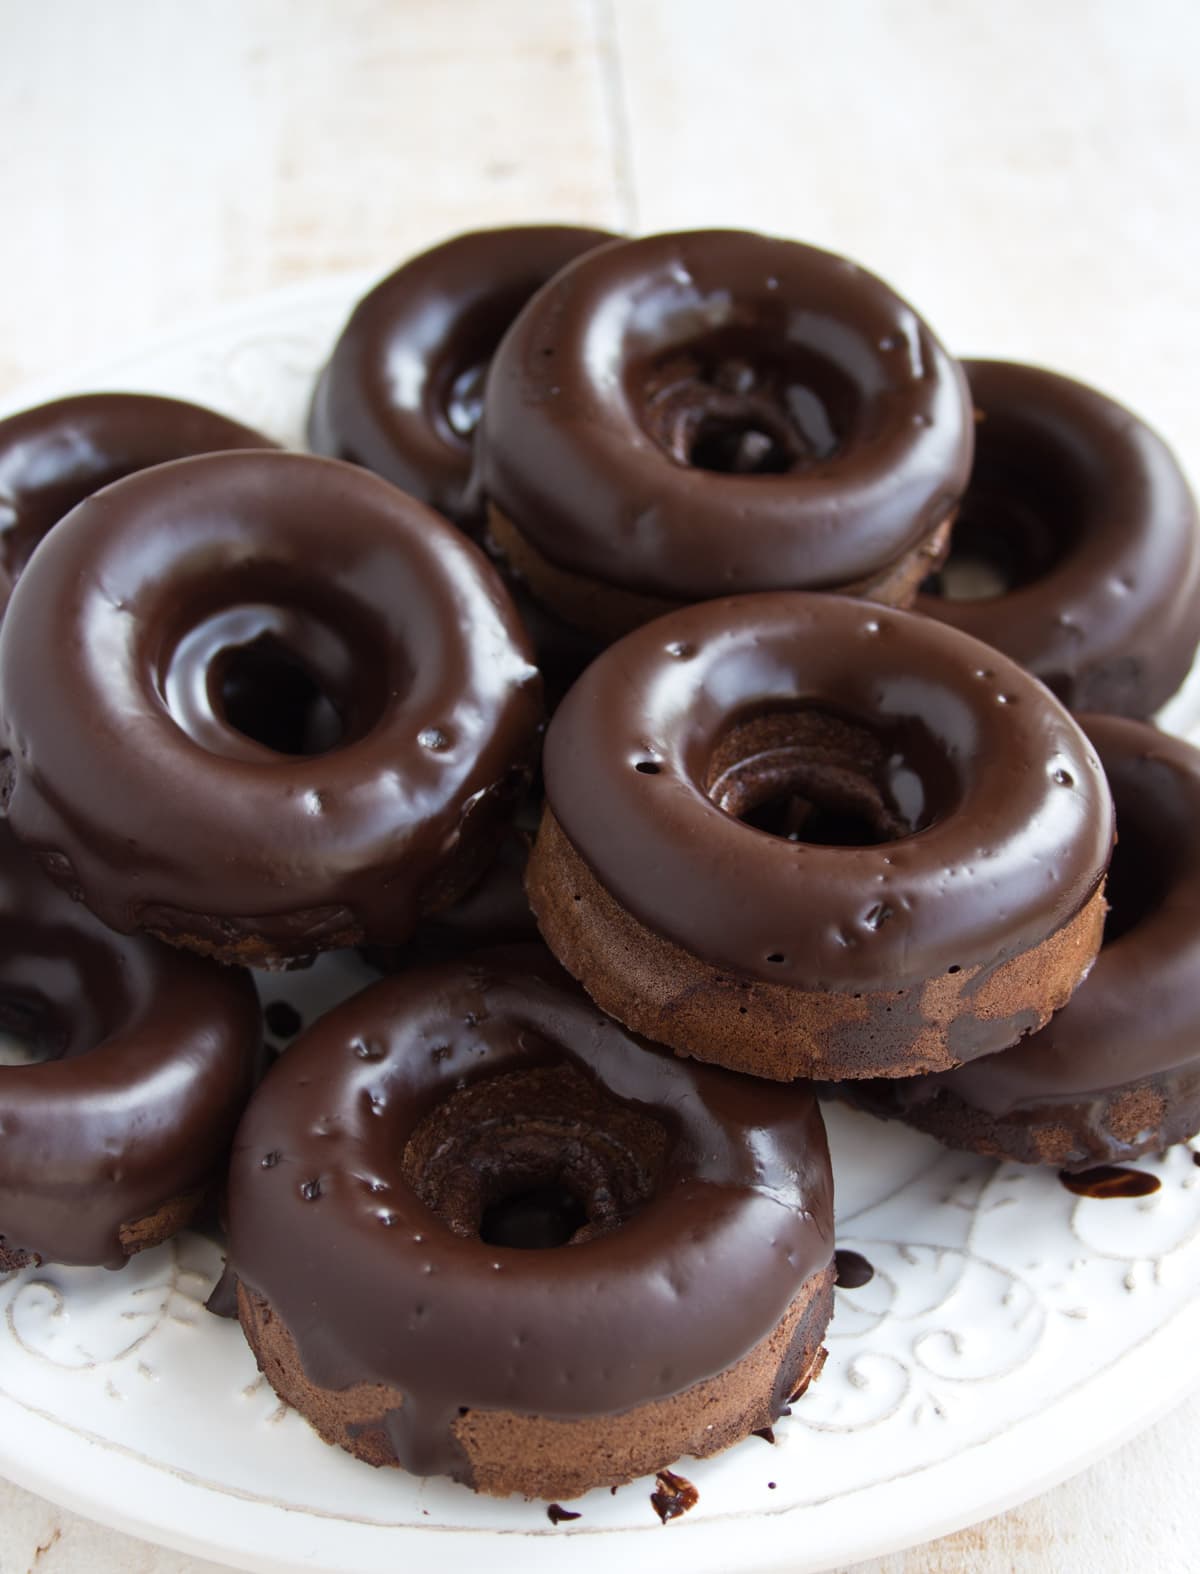 A plate stacked with chocolate glazed keto donuts.